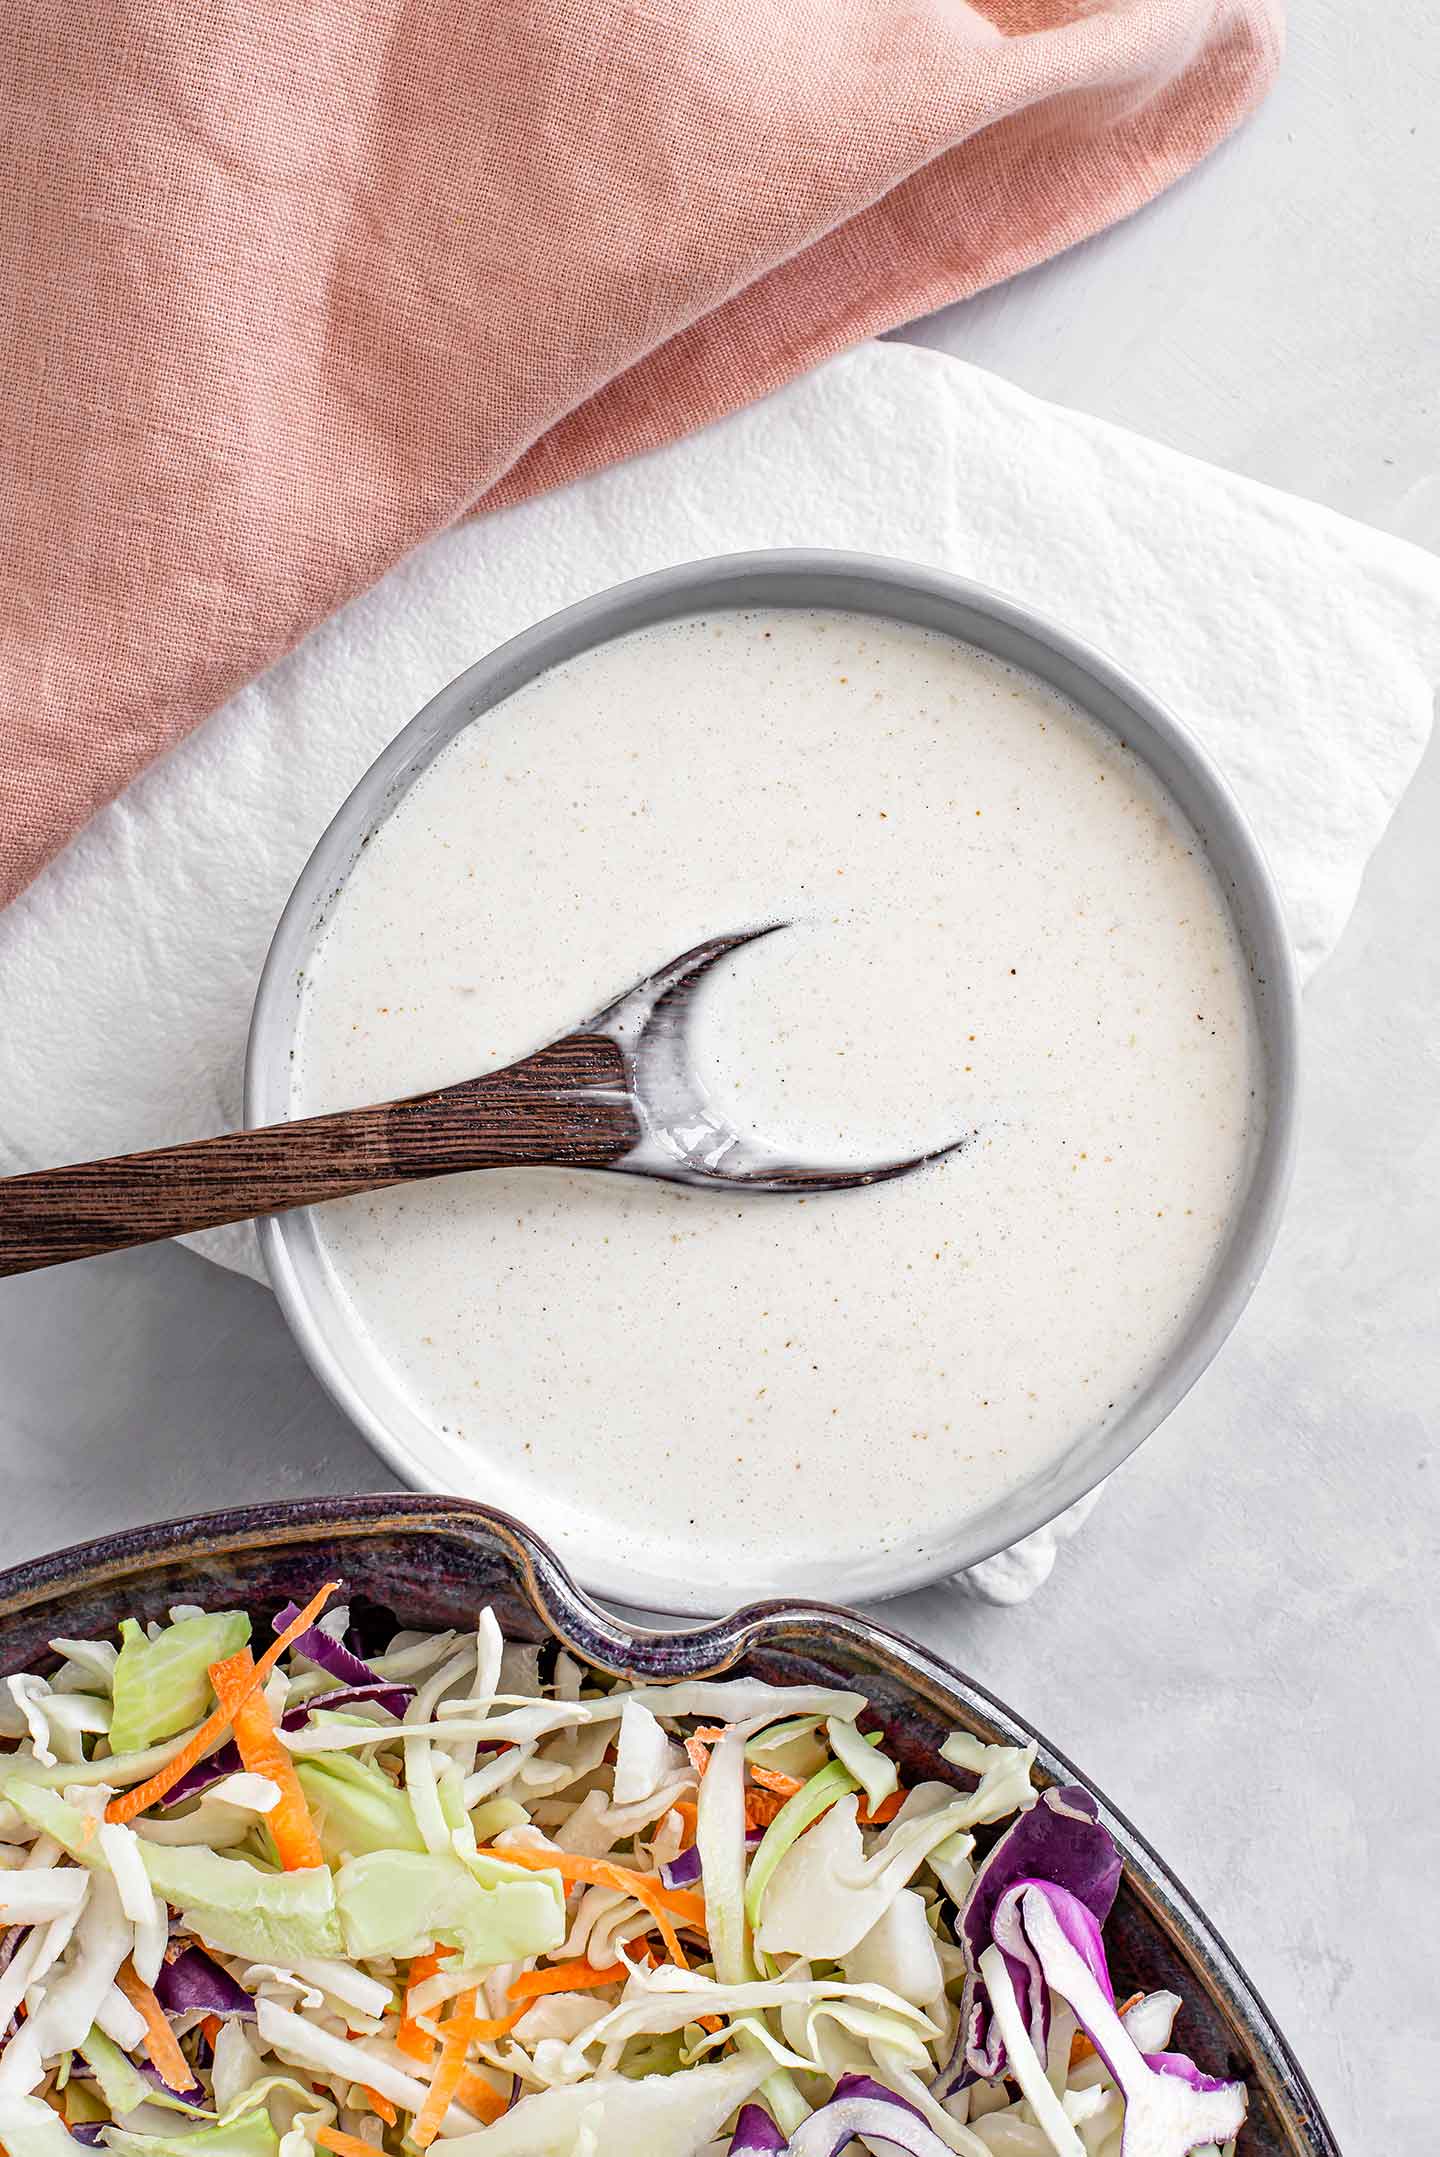 Top down view of vegan coleslaw dressing in a small dish with a spoon resting inside. The aquafaba mayo is speckled with celery salt and black pepper.